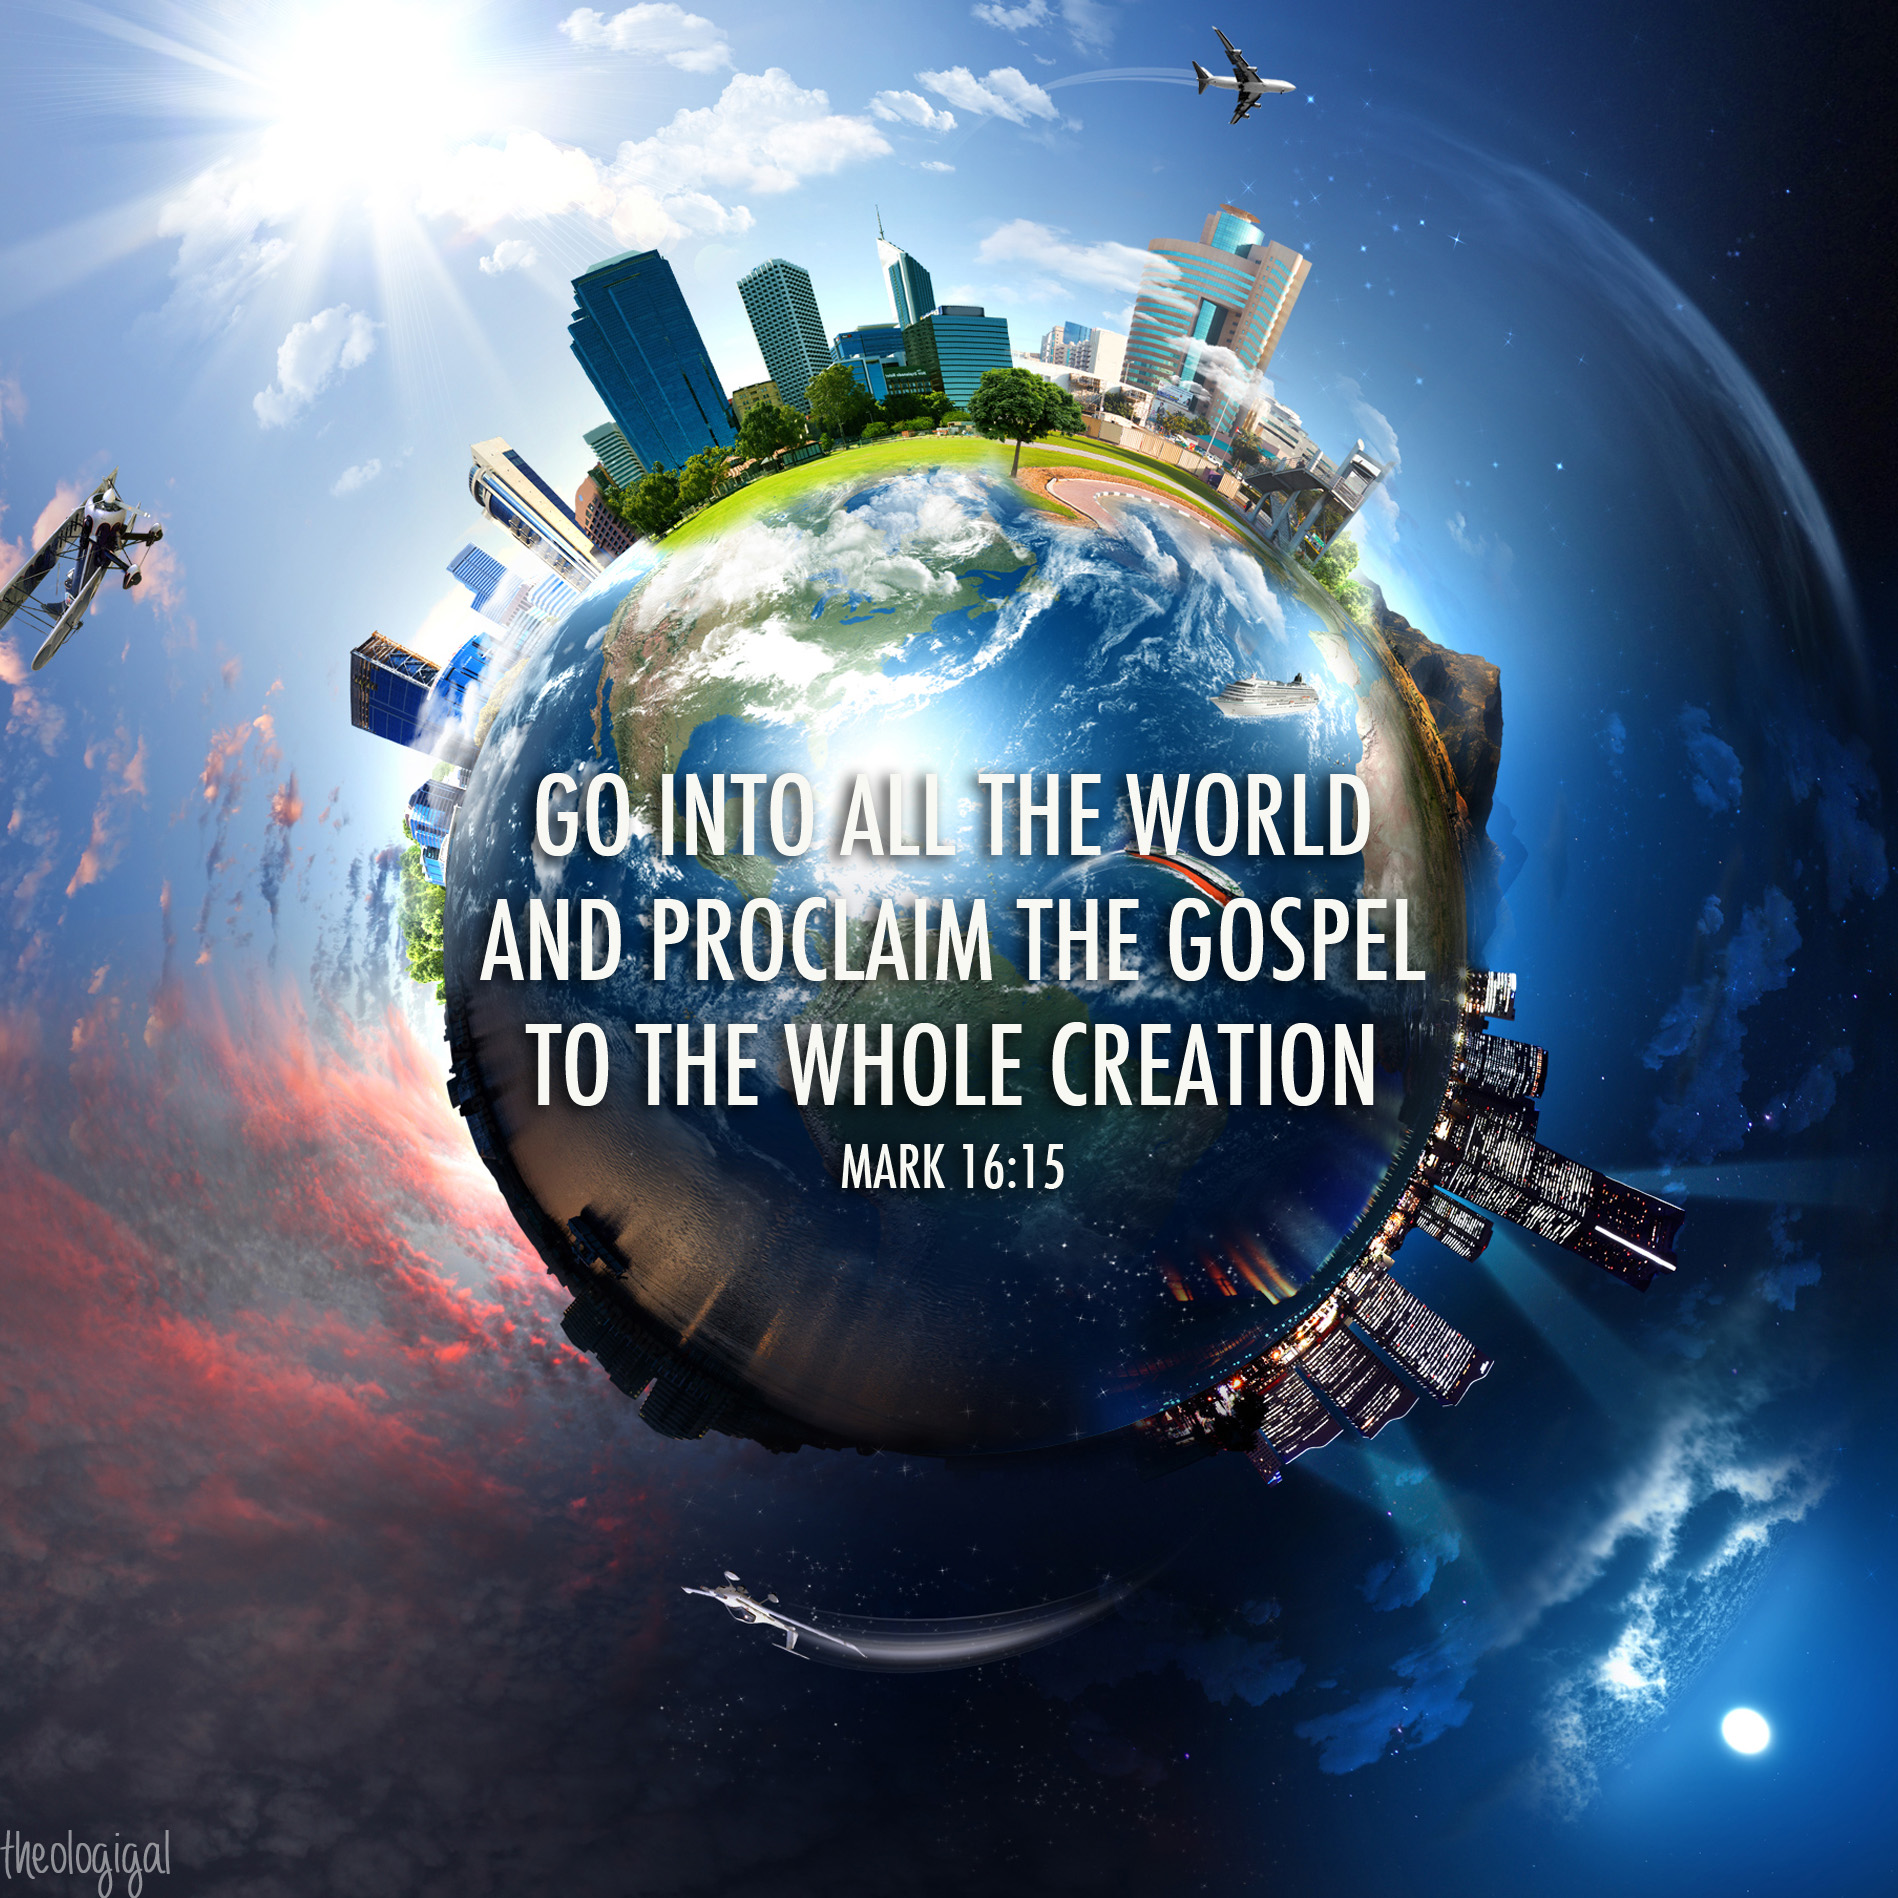 bible-verse-go-into-all-the-world-and-proclaim-the-gospel-to-the-whole-creation-mark-16